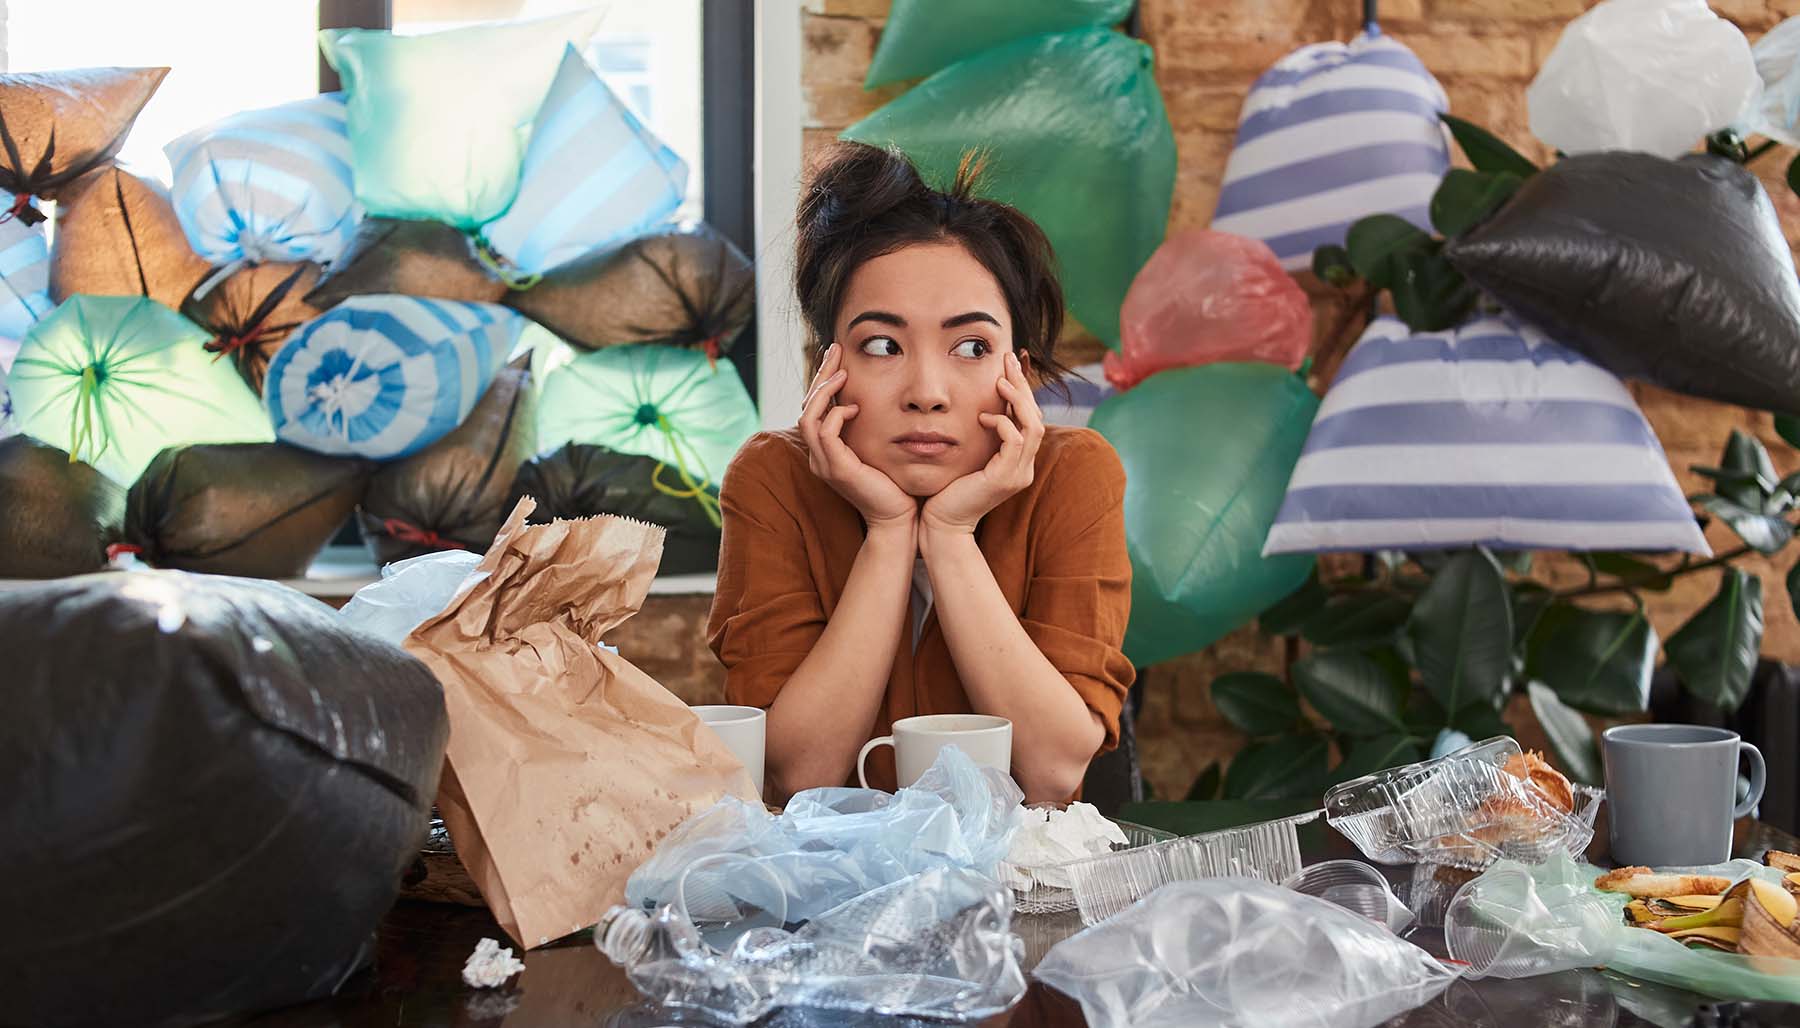 A woman who is overwhelmed by clutter